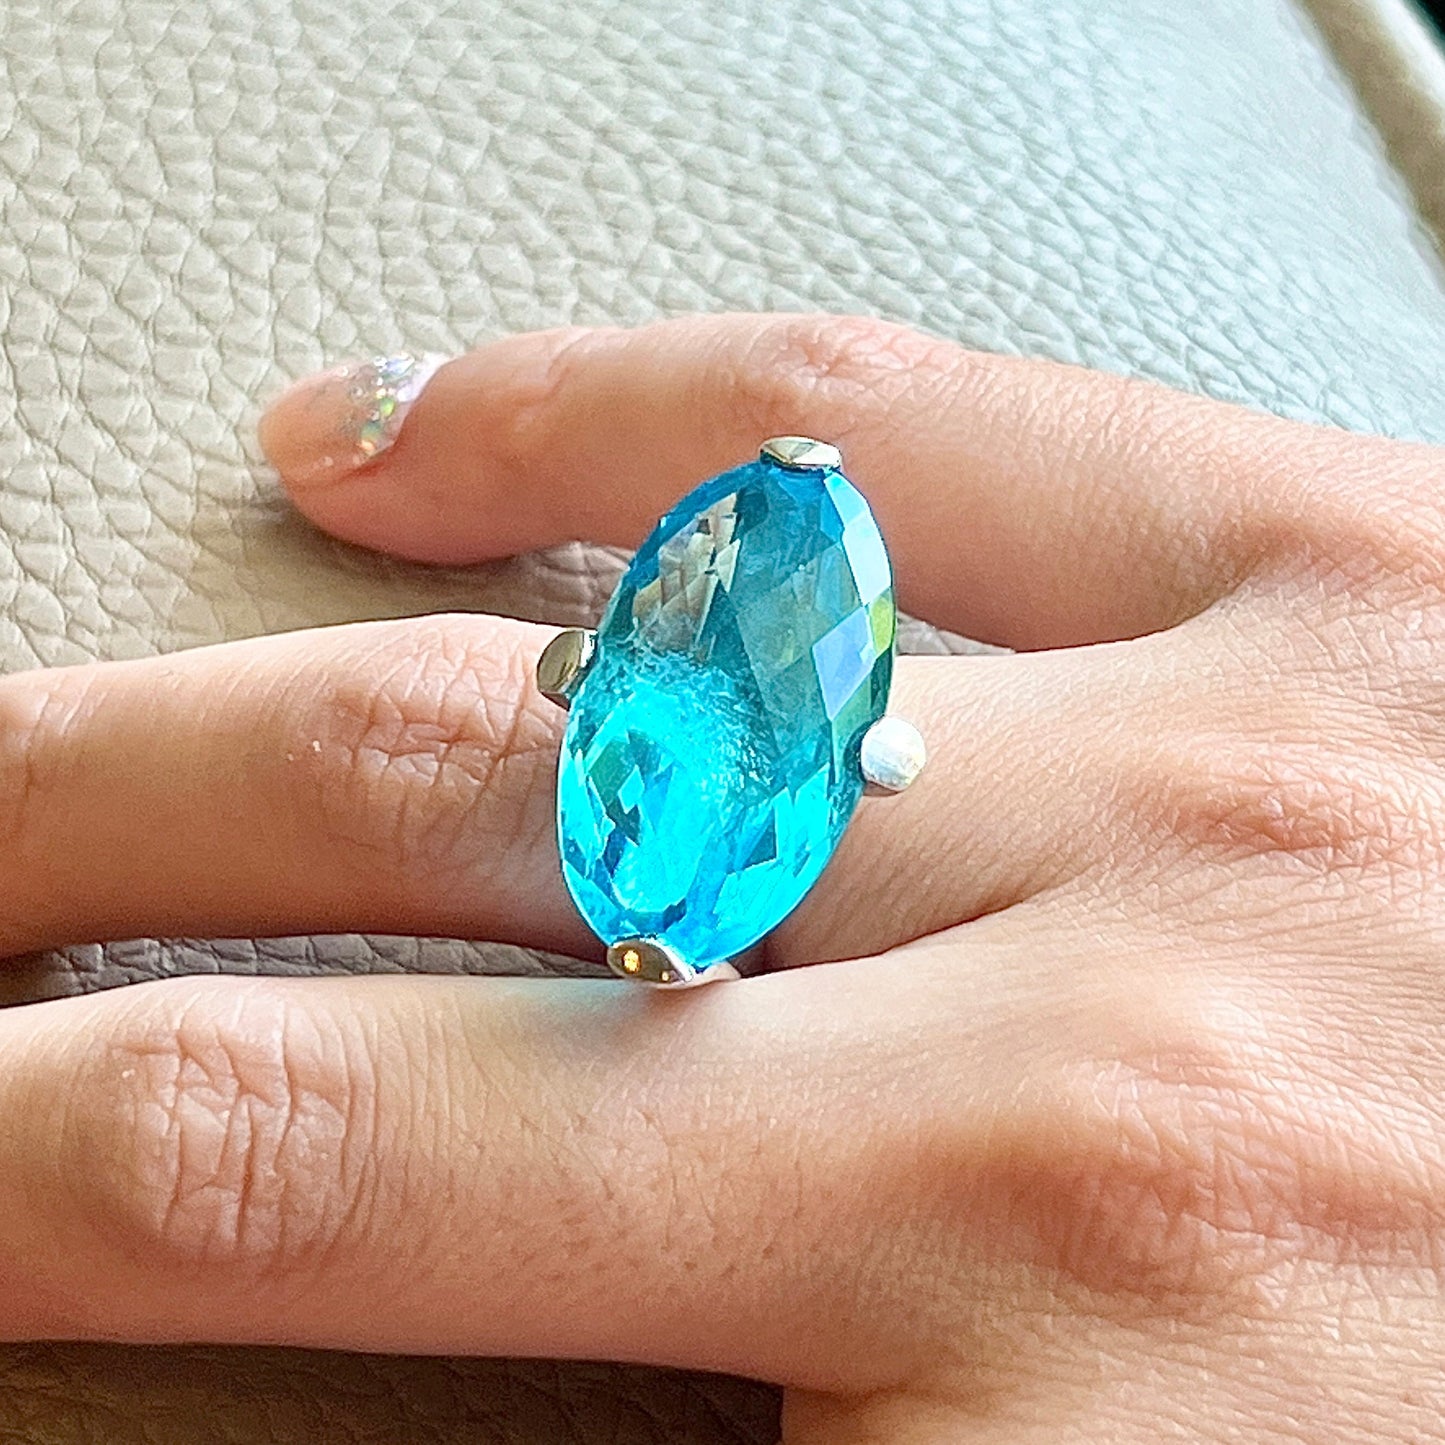 Size 5, Italian Nomination sterling silver 925 statement ring with blue crystal